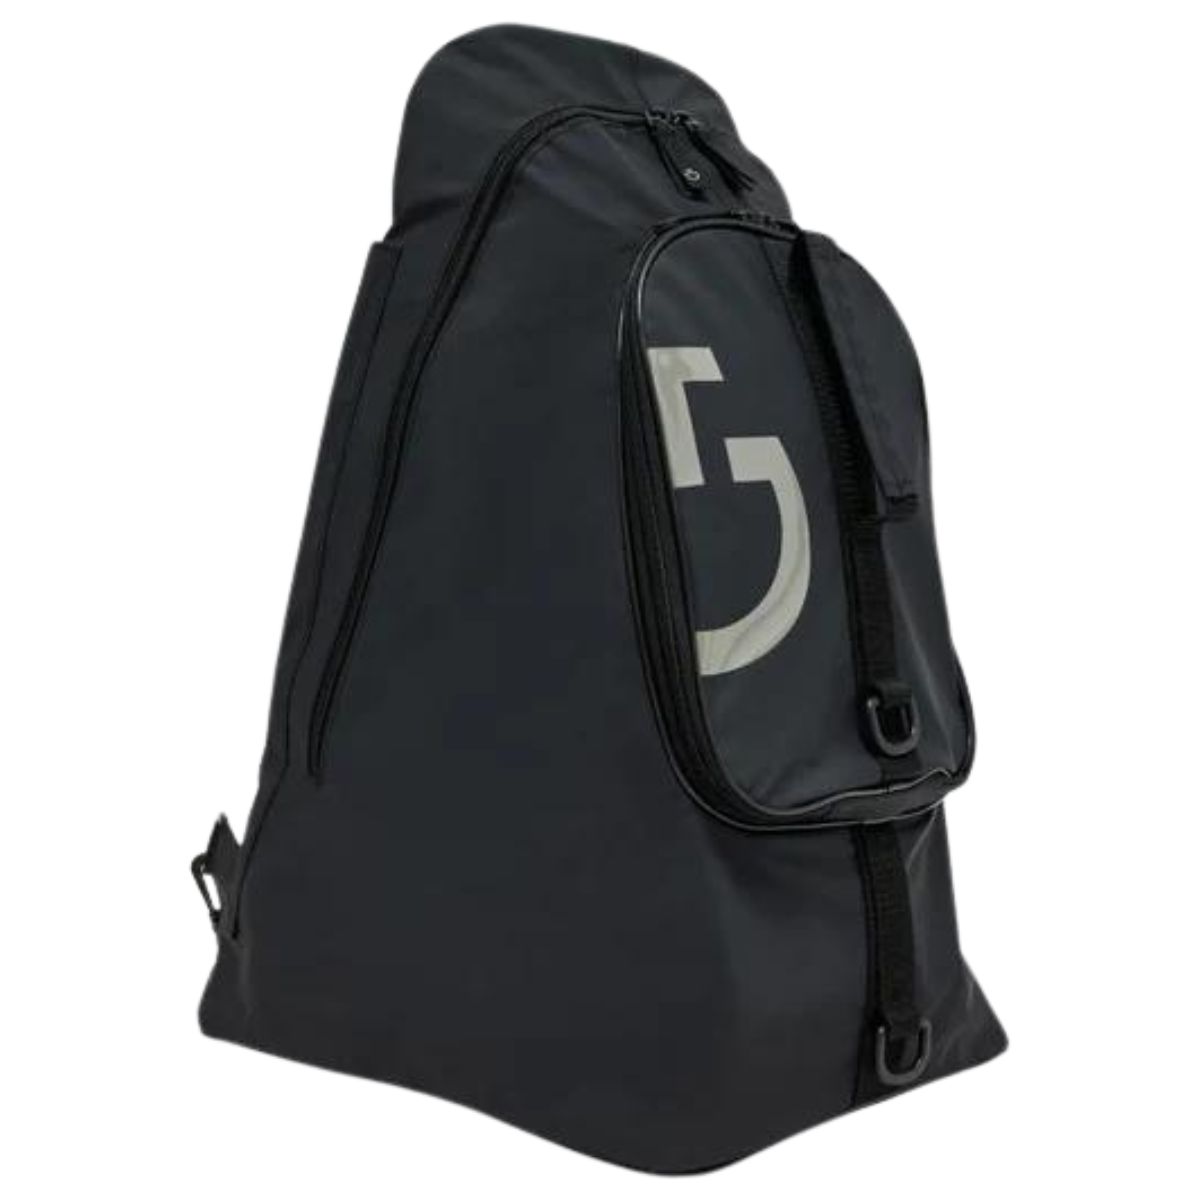 Cavalleria Toscana 'Hold All' Backpack in Black